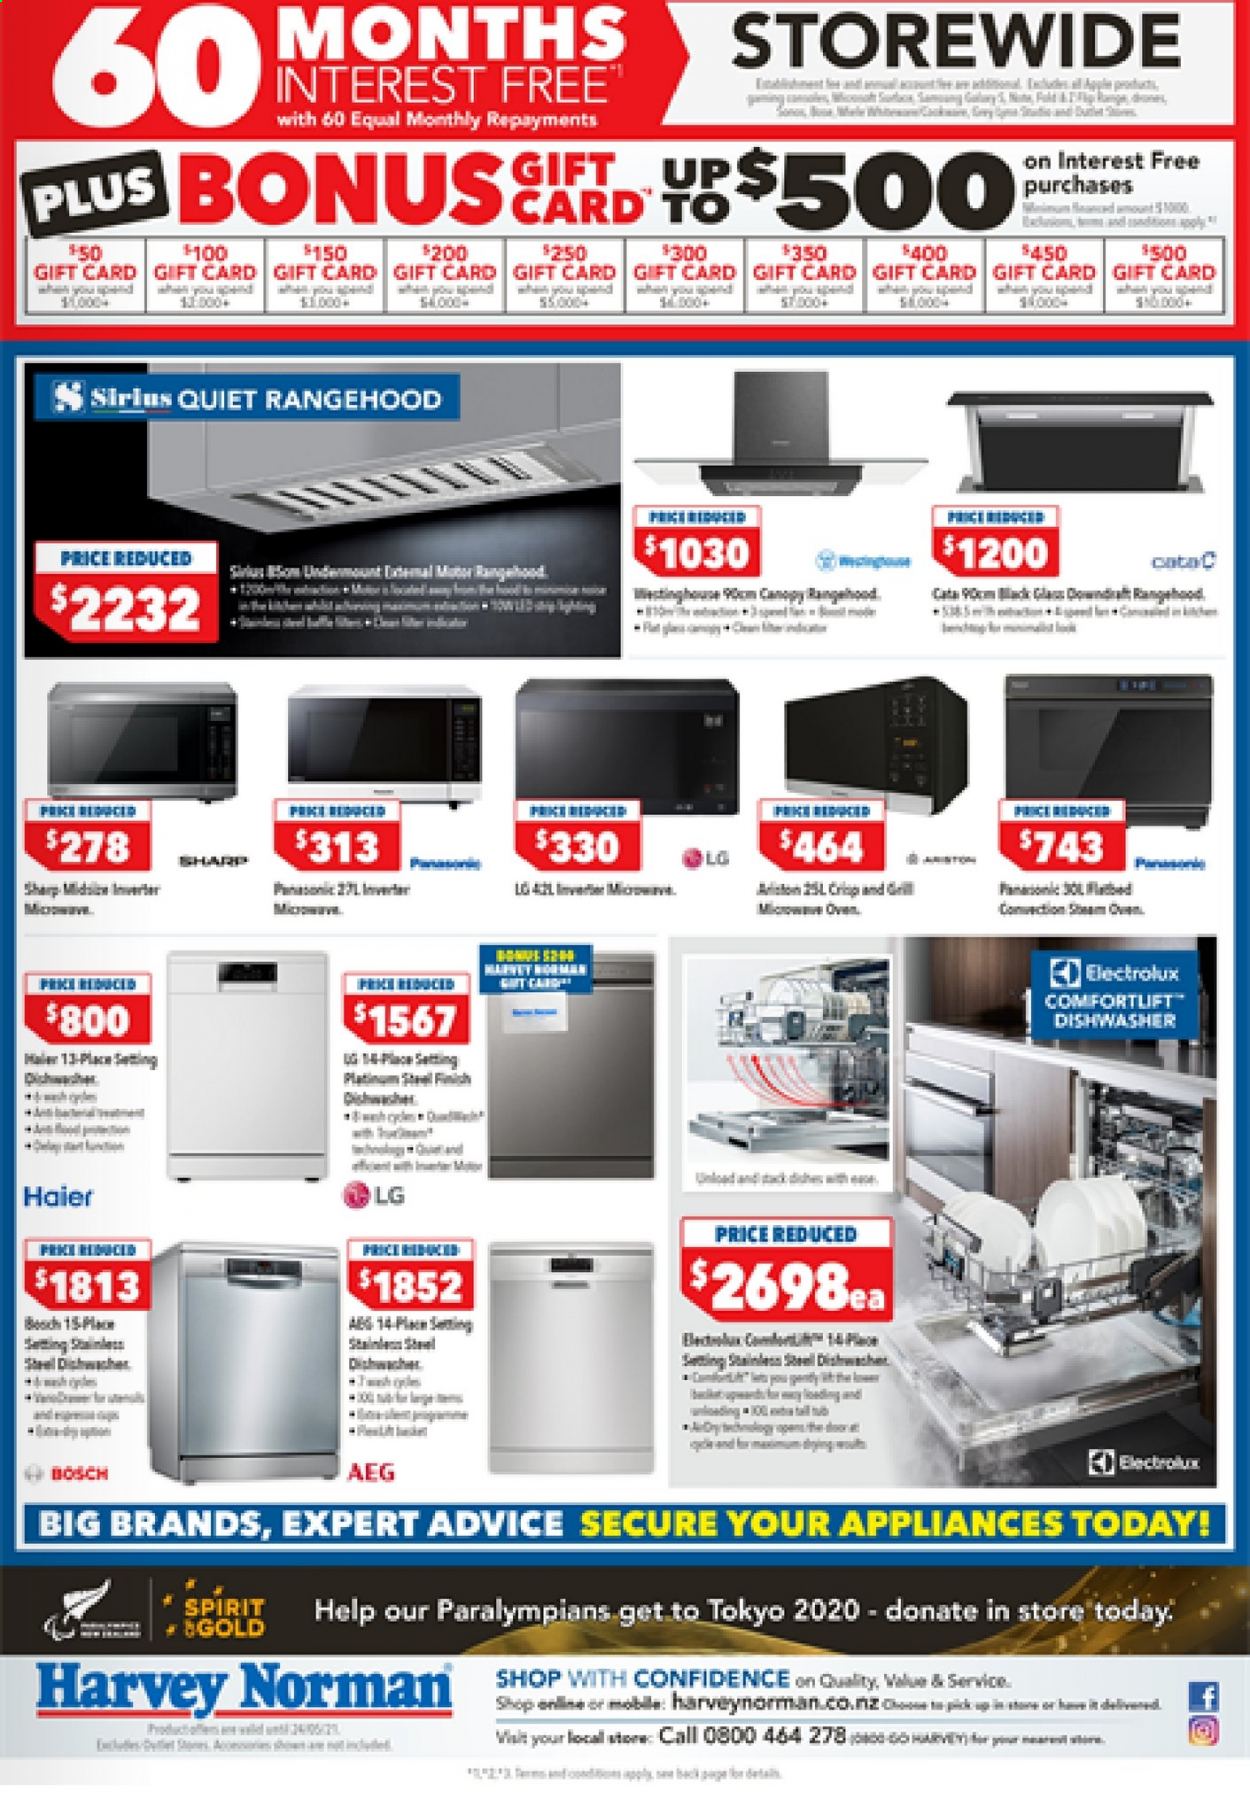 thumbnail - Harvey Norman mailer - 14.05.2021 - 19.05.2021 - Sales products - LG, Haier, AEG, Electrolux, oven, dishwasher. Page 3.